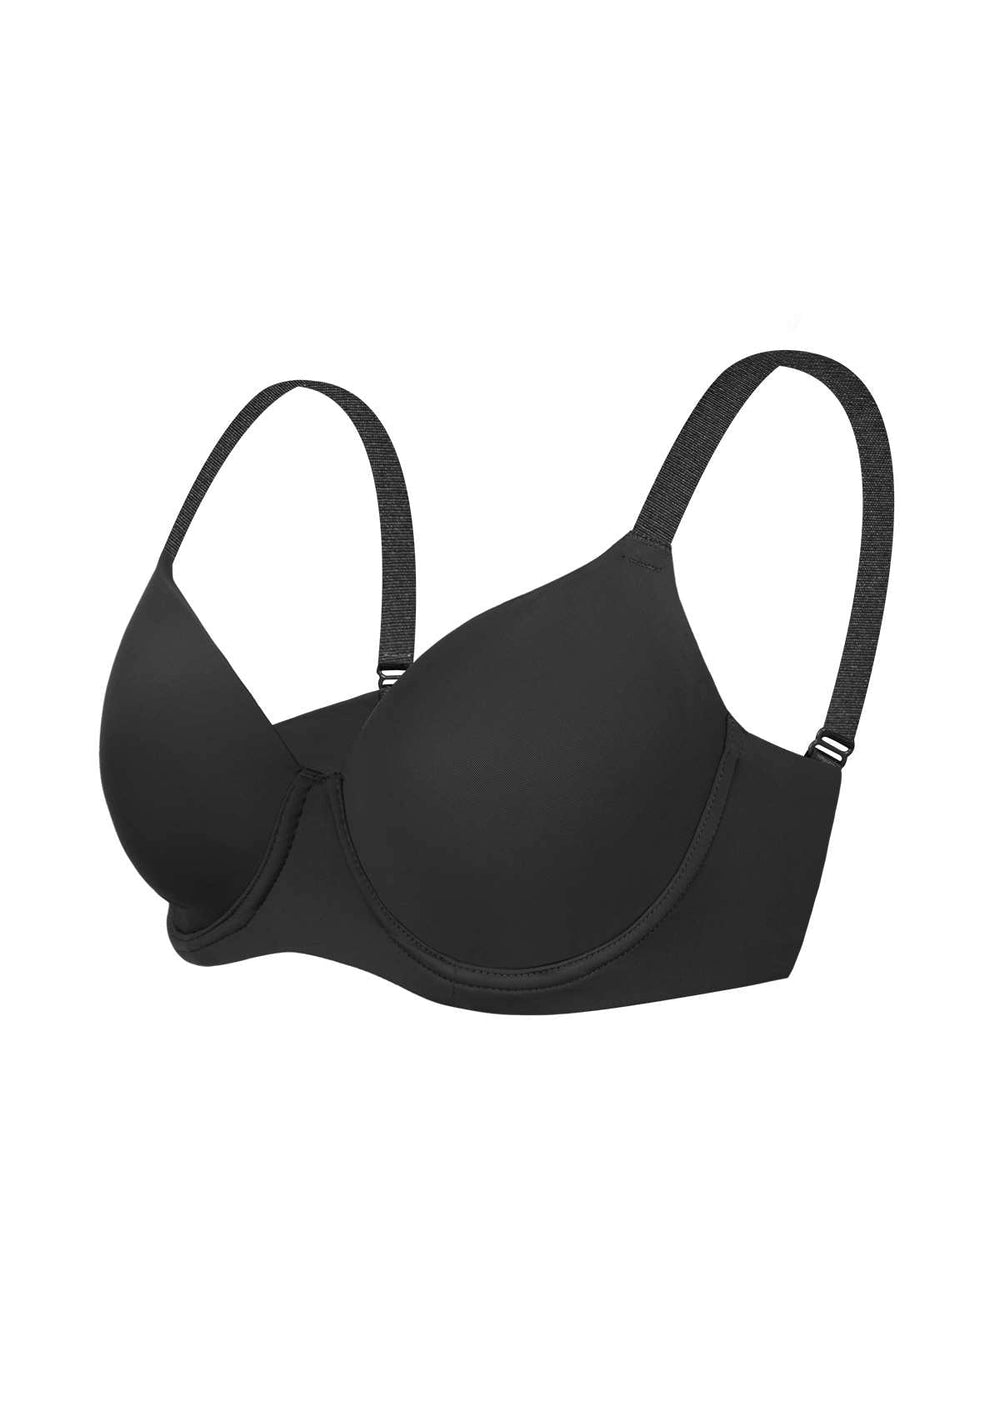 Woman Within - Play it cool. Our new T-Shirt Bras have smooth